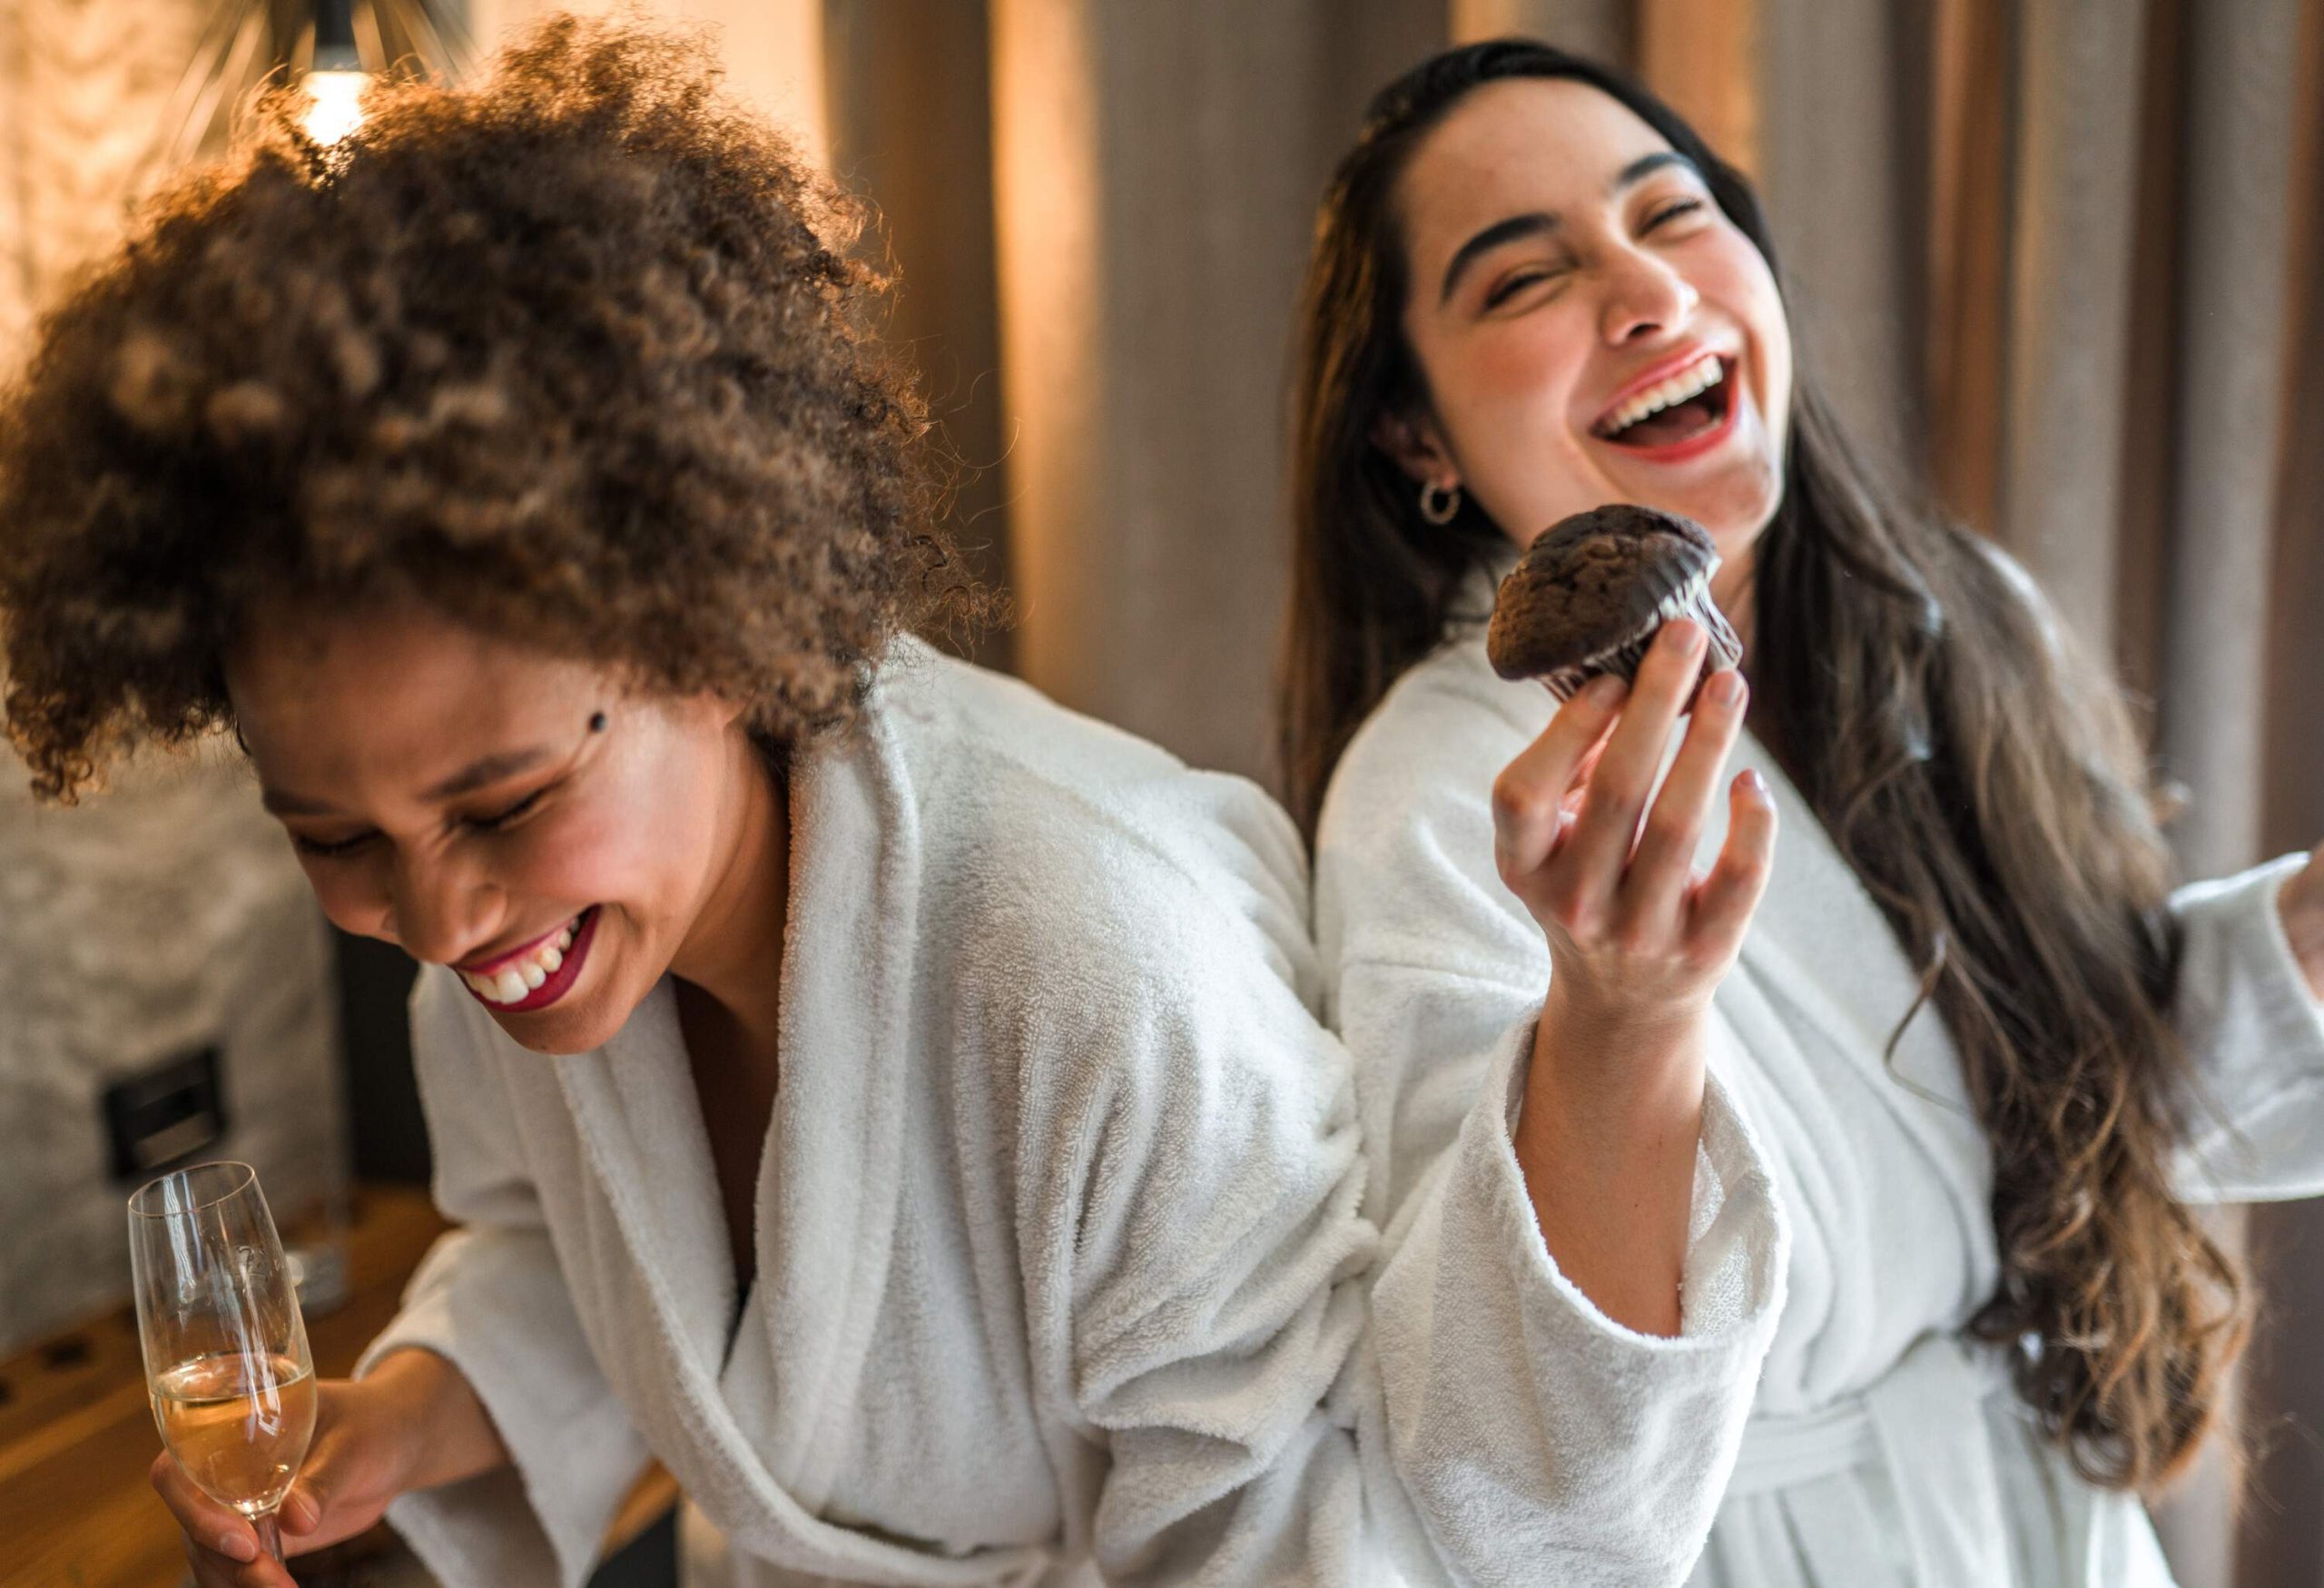 Two young women of mixed race share a playful moment in a hotel room, donning bathrobes and holding glasses of wine, with one of them also clutching a delicious chocolate muffin.